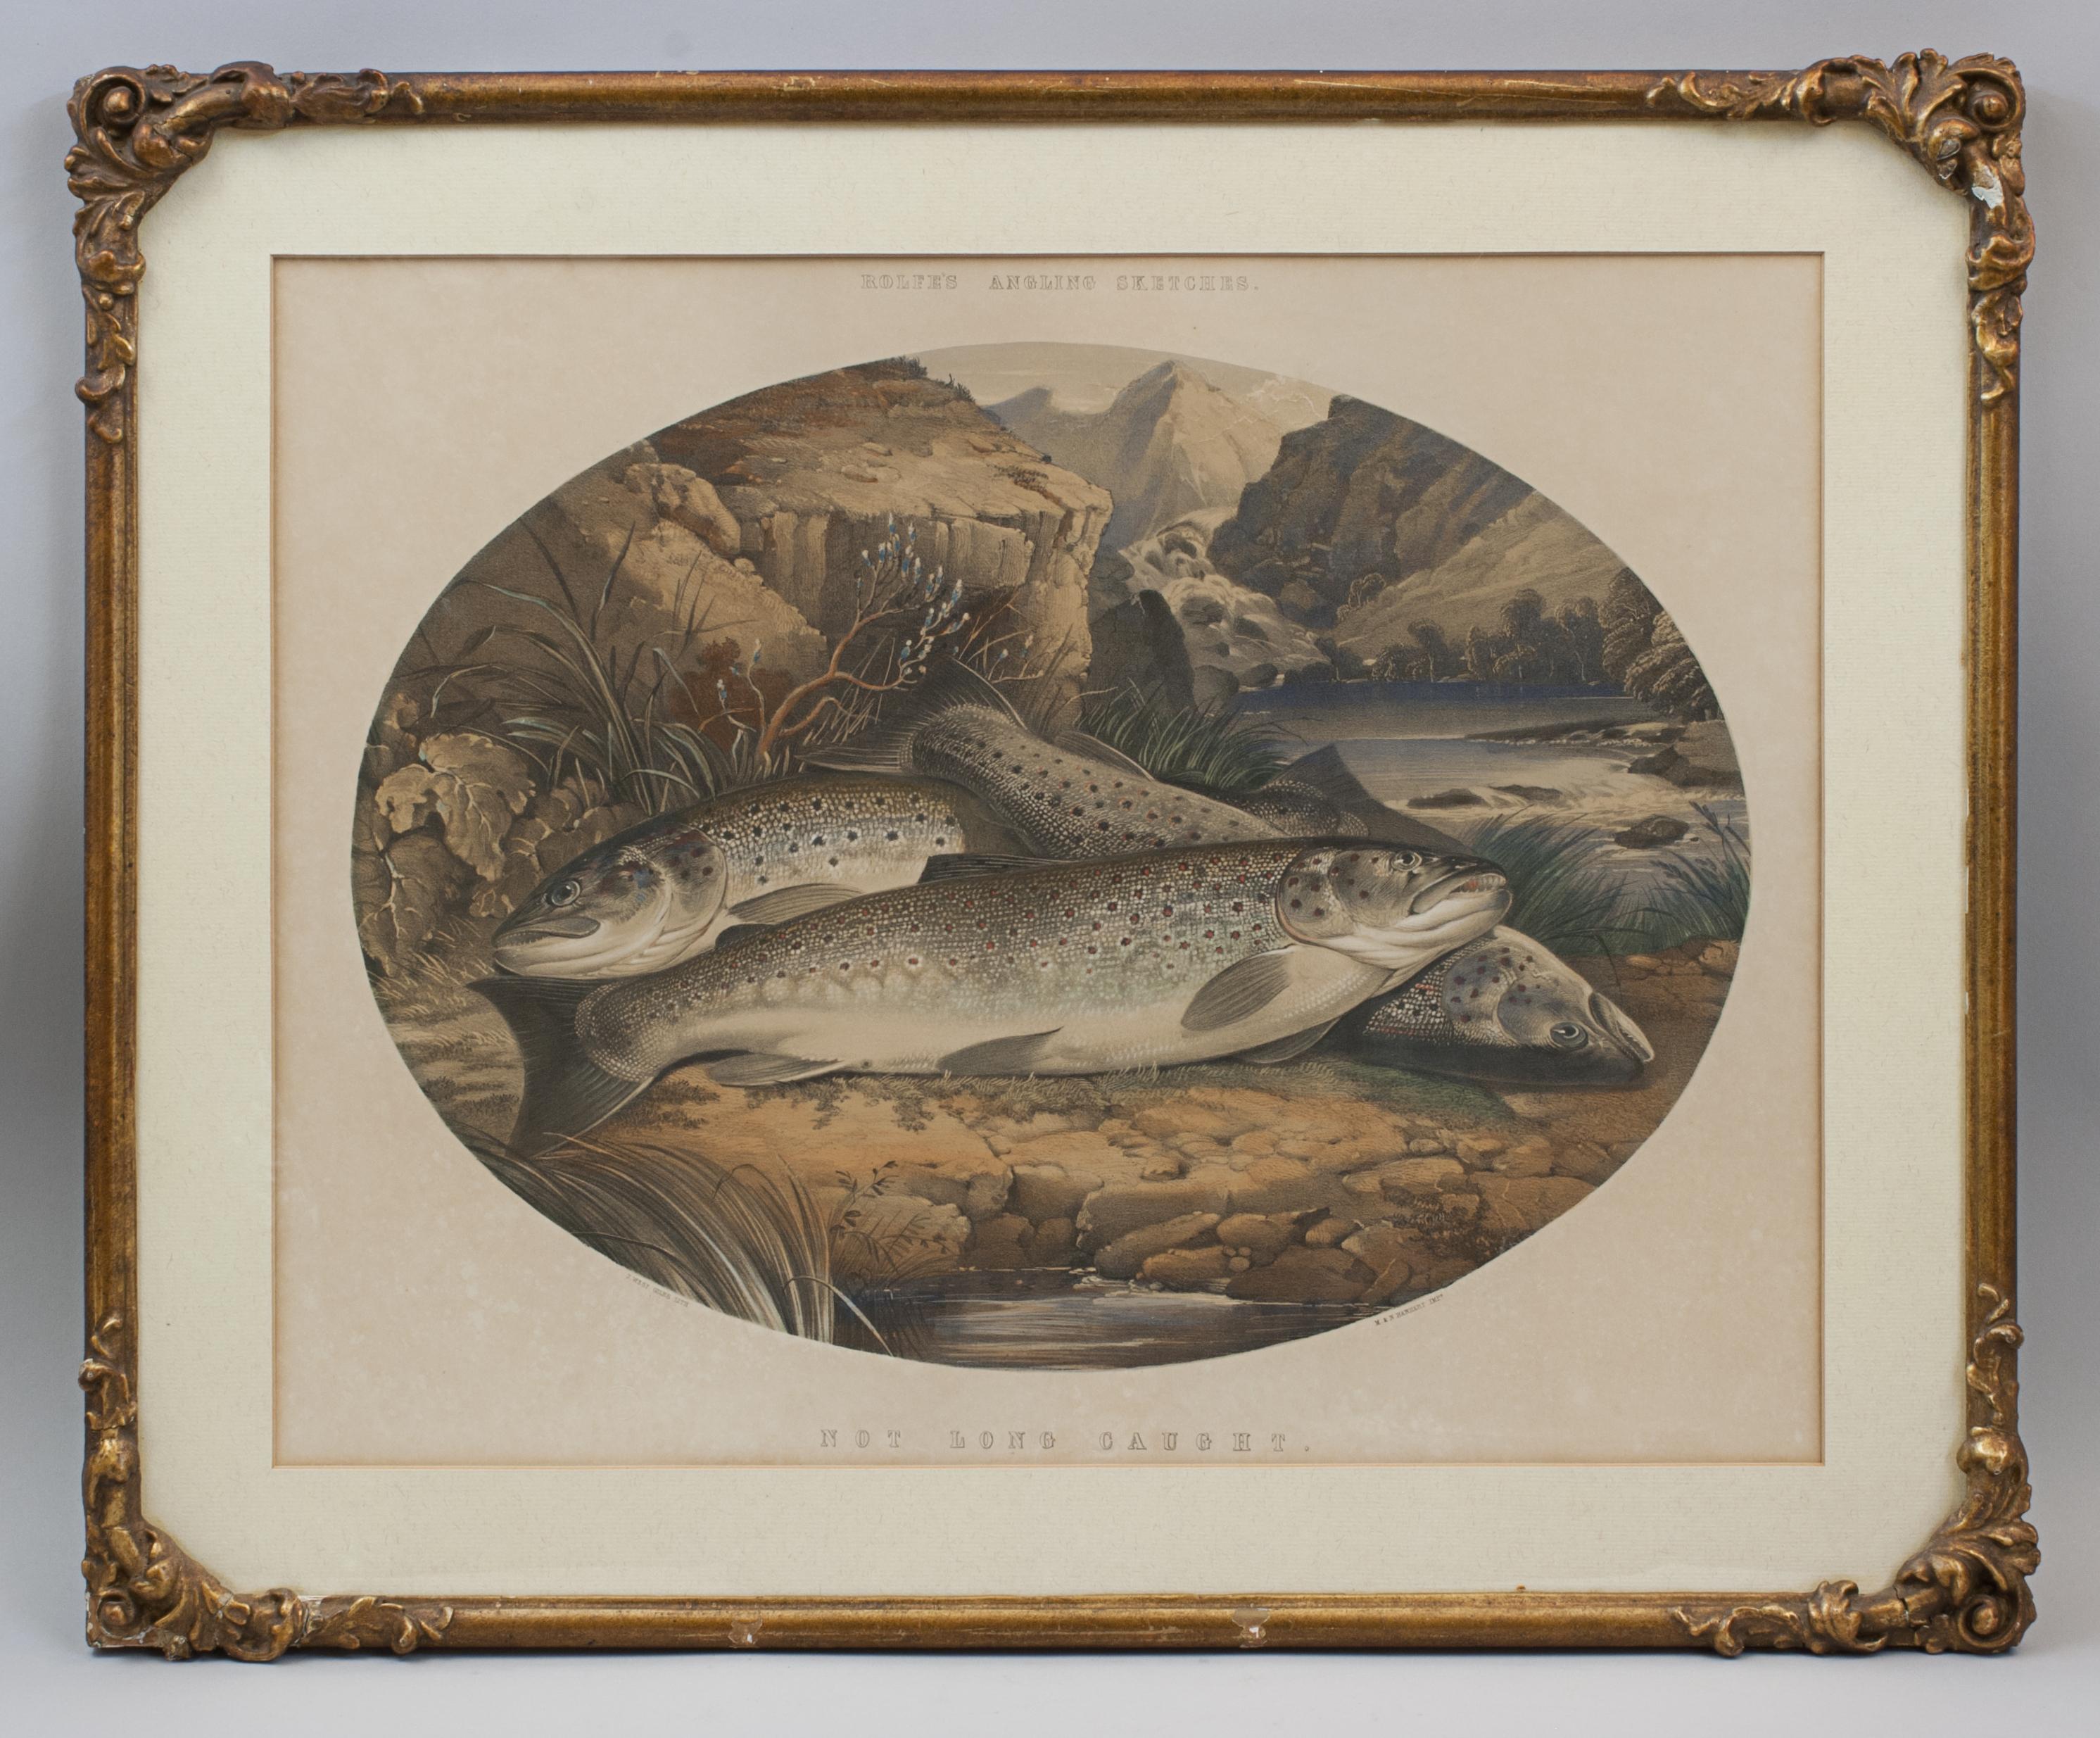 Rolfe's Angling Sketches.
An extremely rare colourful fishing lithograph after Henry Leonidas Rolfe (1823 - 1881) 'Rolfe's Angling Sketches, Not Long Caught'. Printed in colours by J. West Giles with hand finishing, printed by M & N Hanhart.